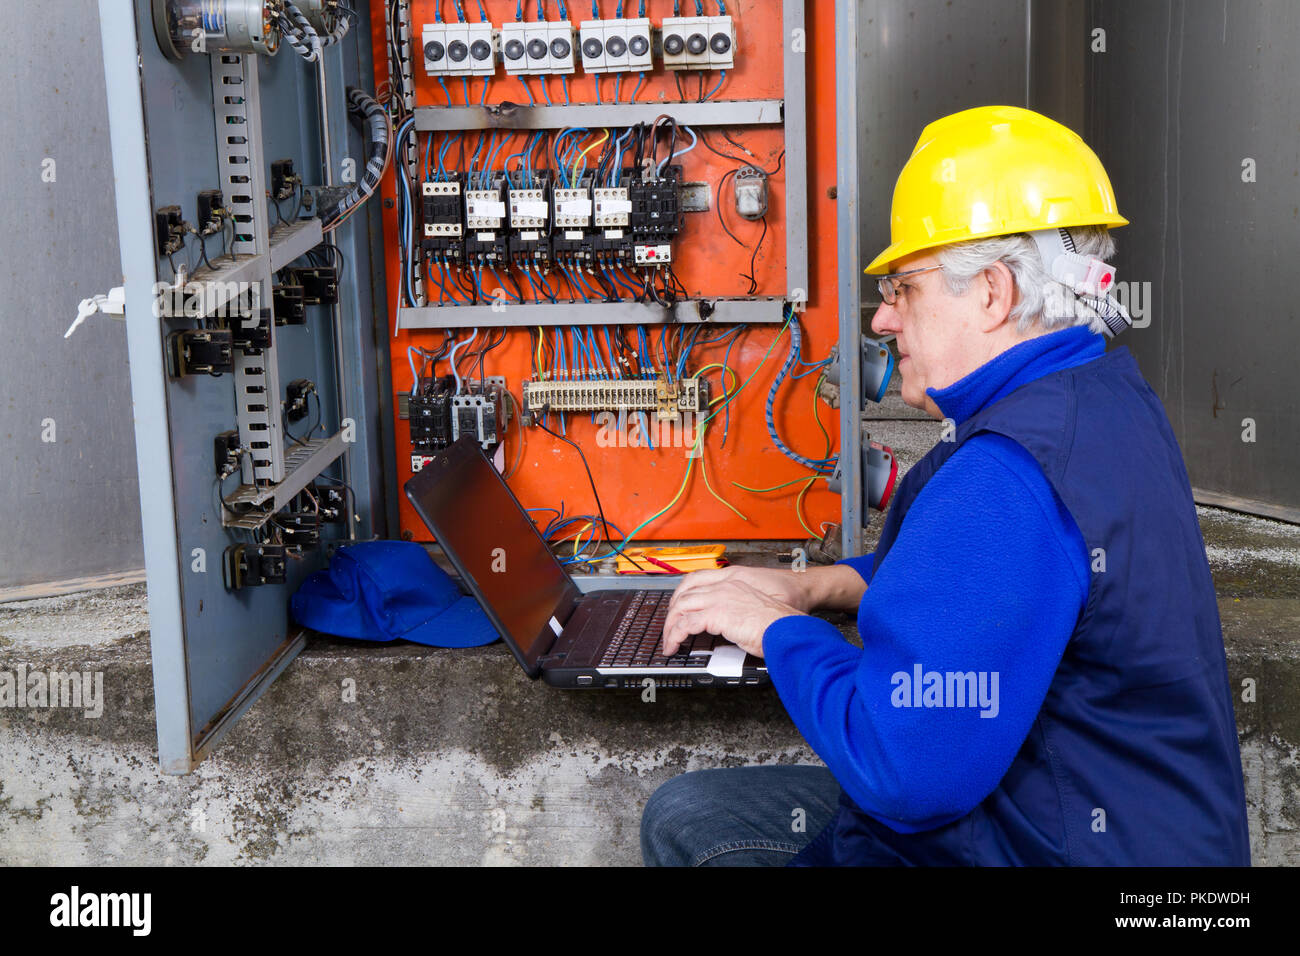 electrician at work with an electric panel Stock Photo